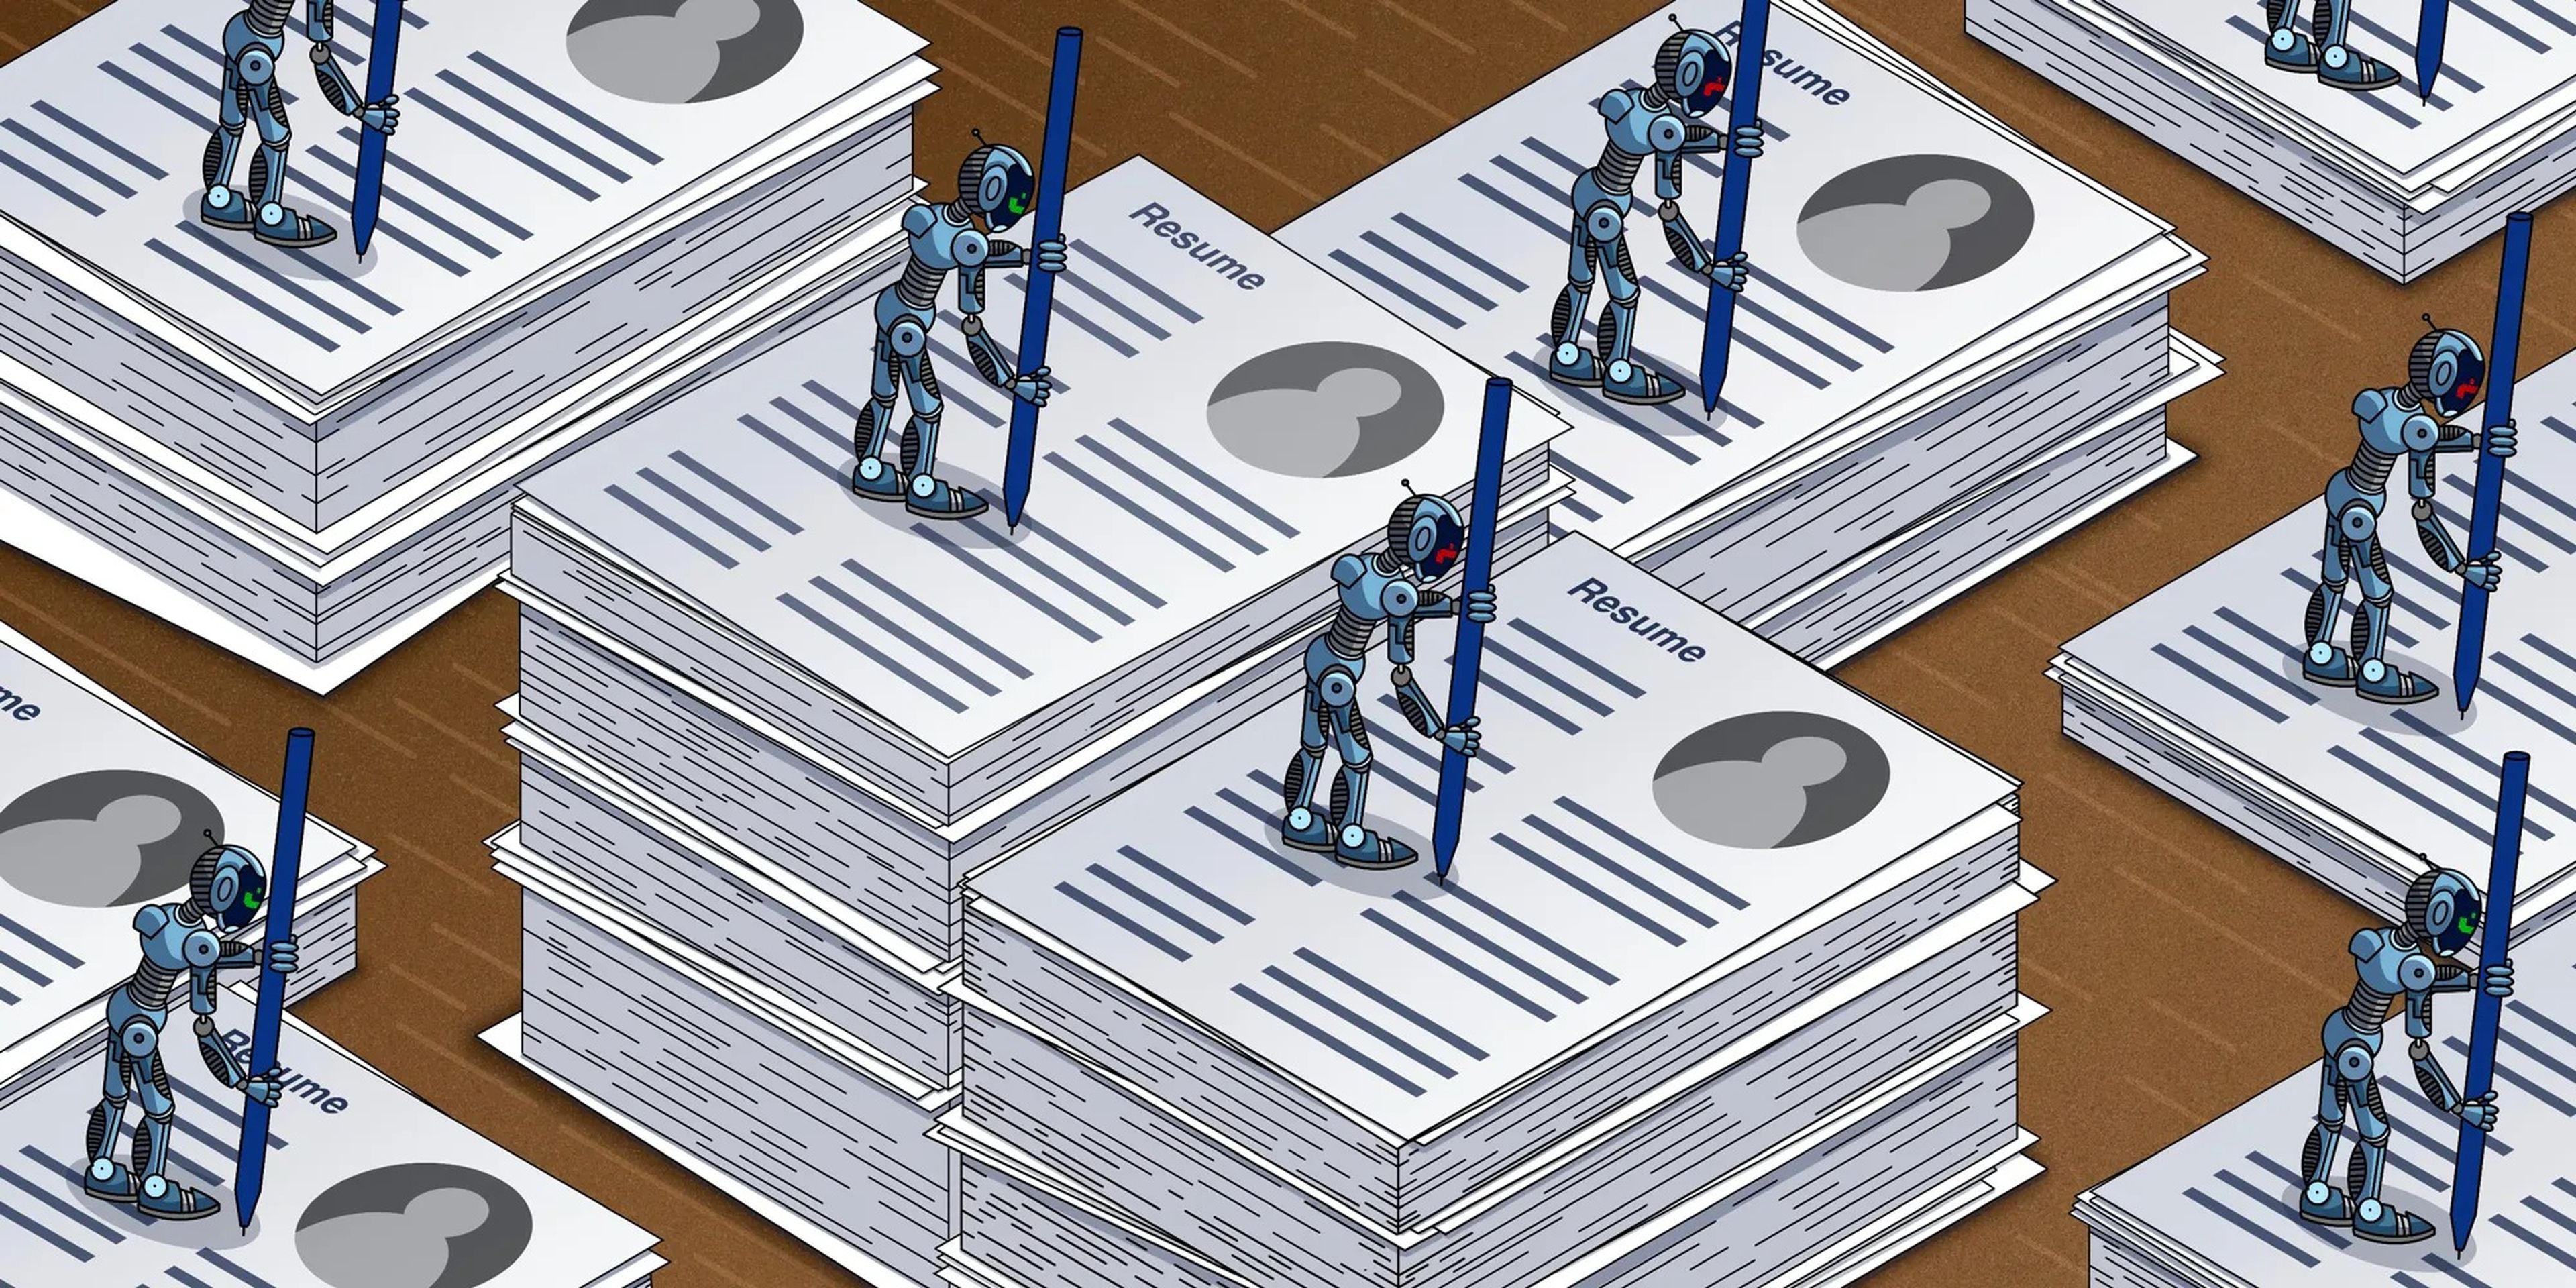 Robots filling out stacks of resumes.